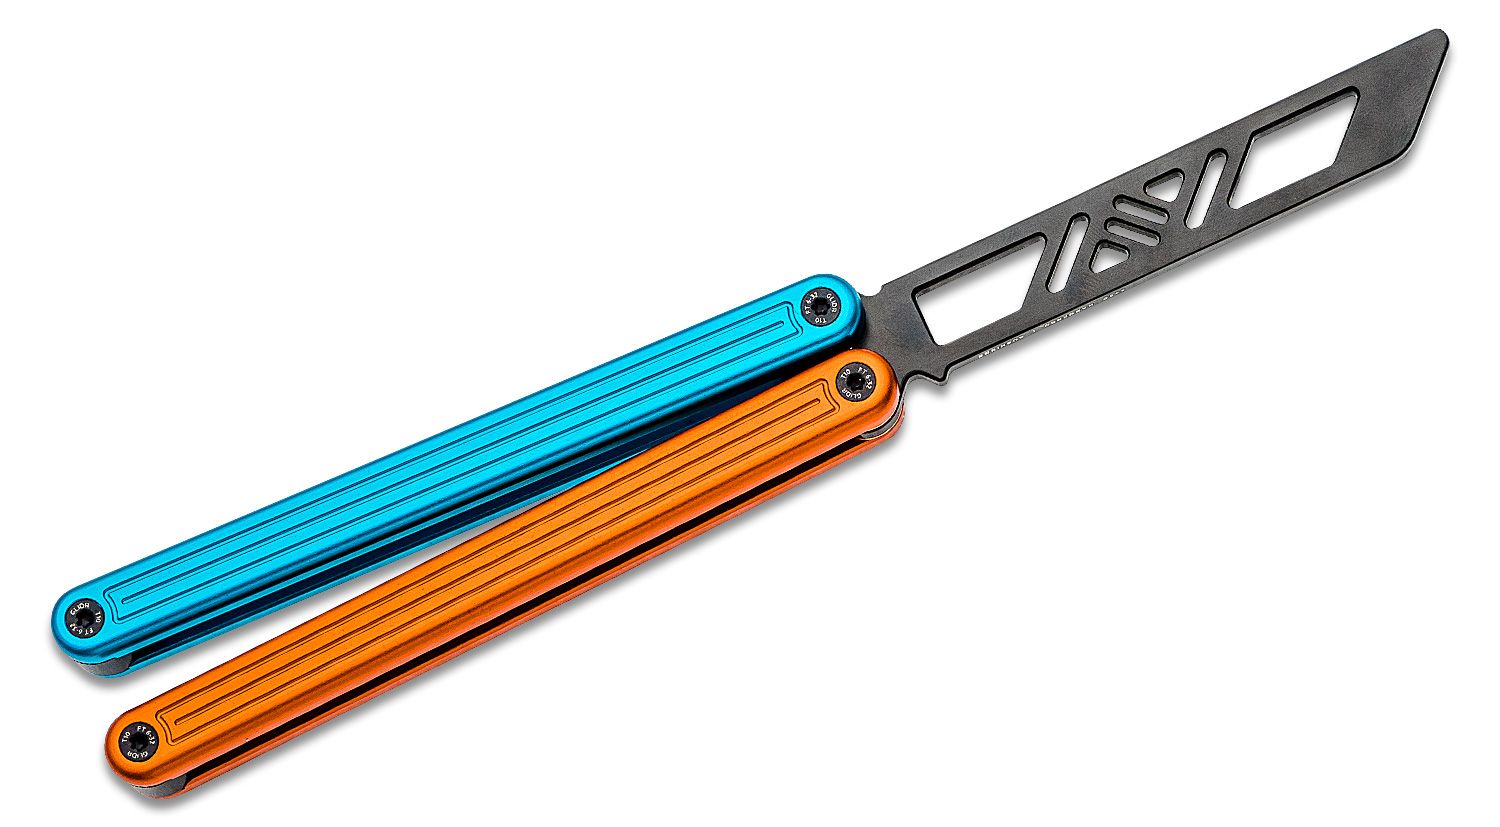 Glidr Arctic Fire & Ice Balisong Butterfly Trainer 4.8 Unsharpened Black  PVD Blade, Orange and Blue Aluminum Handles - KnifeCenter